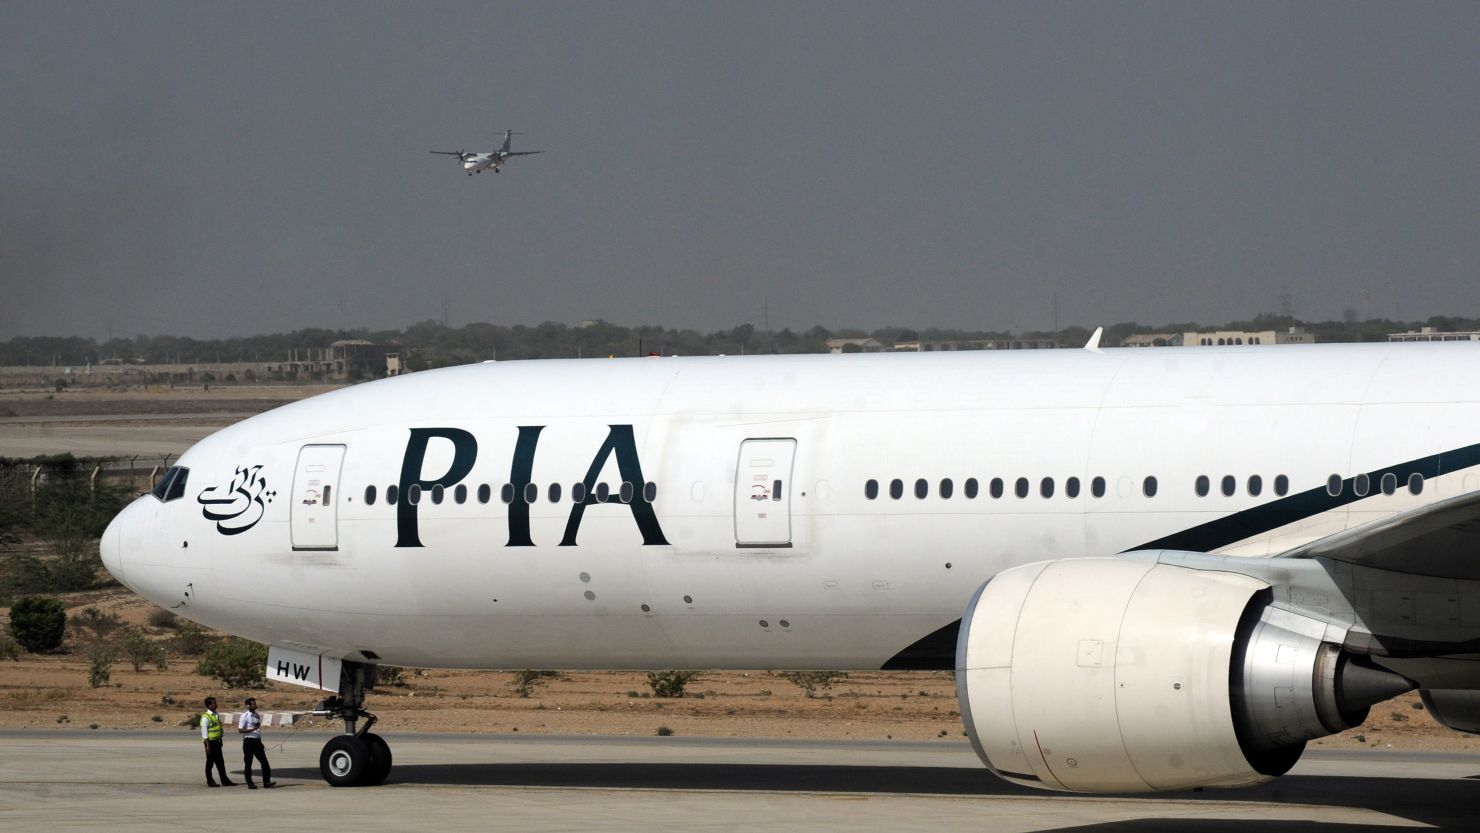 PIA flight 702 was delayed by seven hours due to the incident.